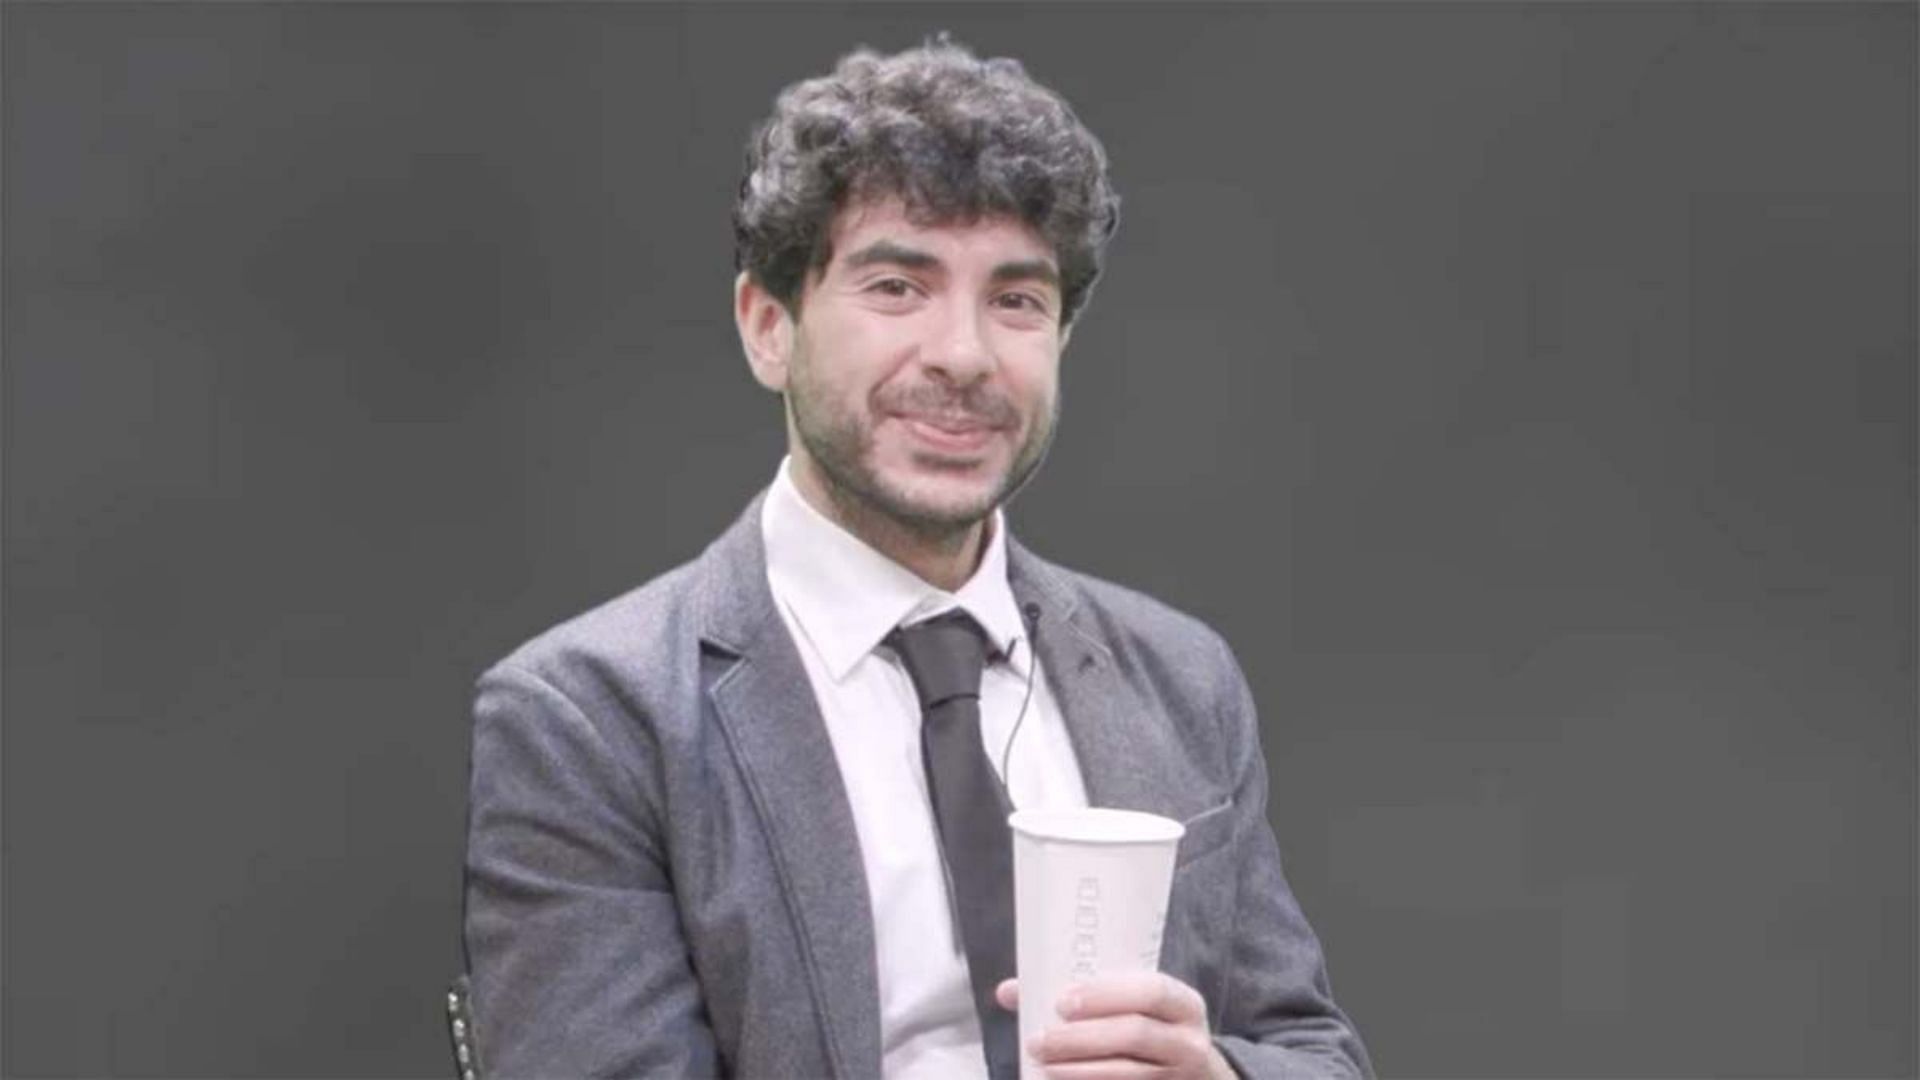 Tony Khan appears to have political ambitions